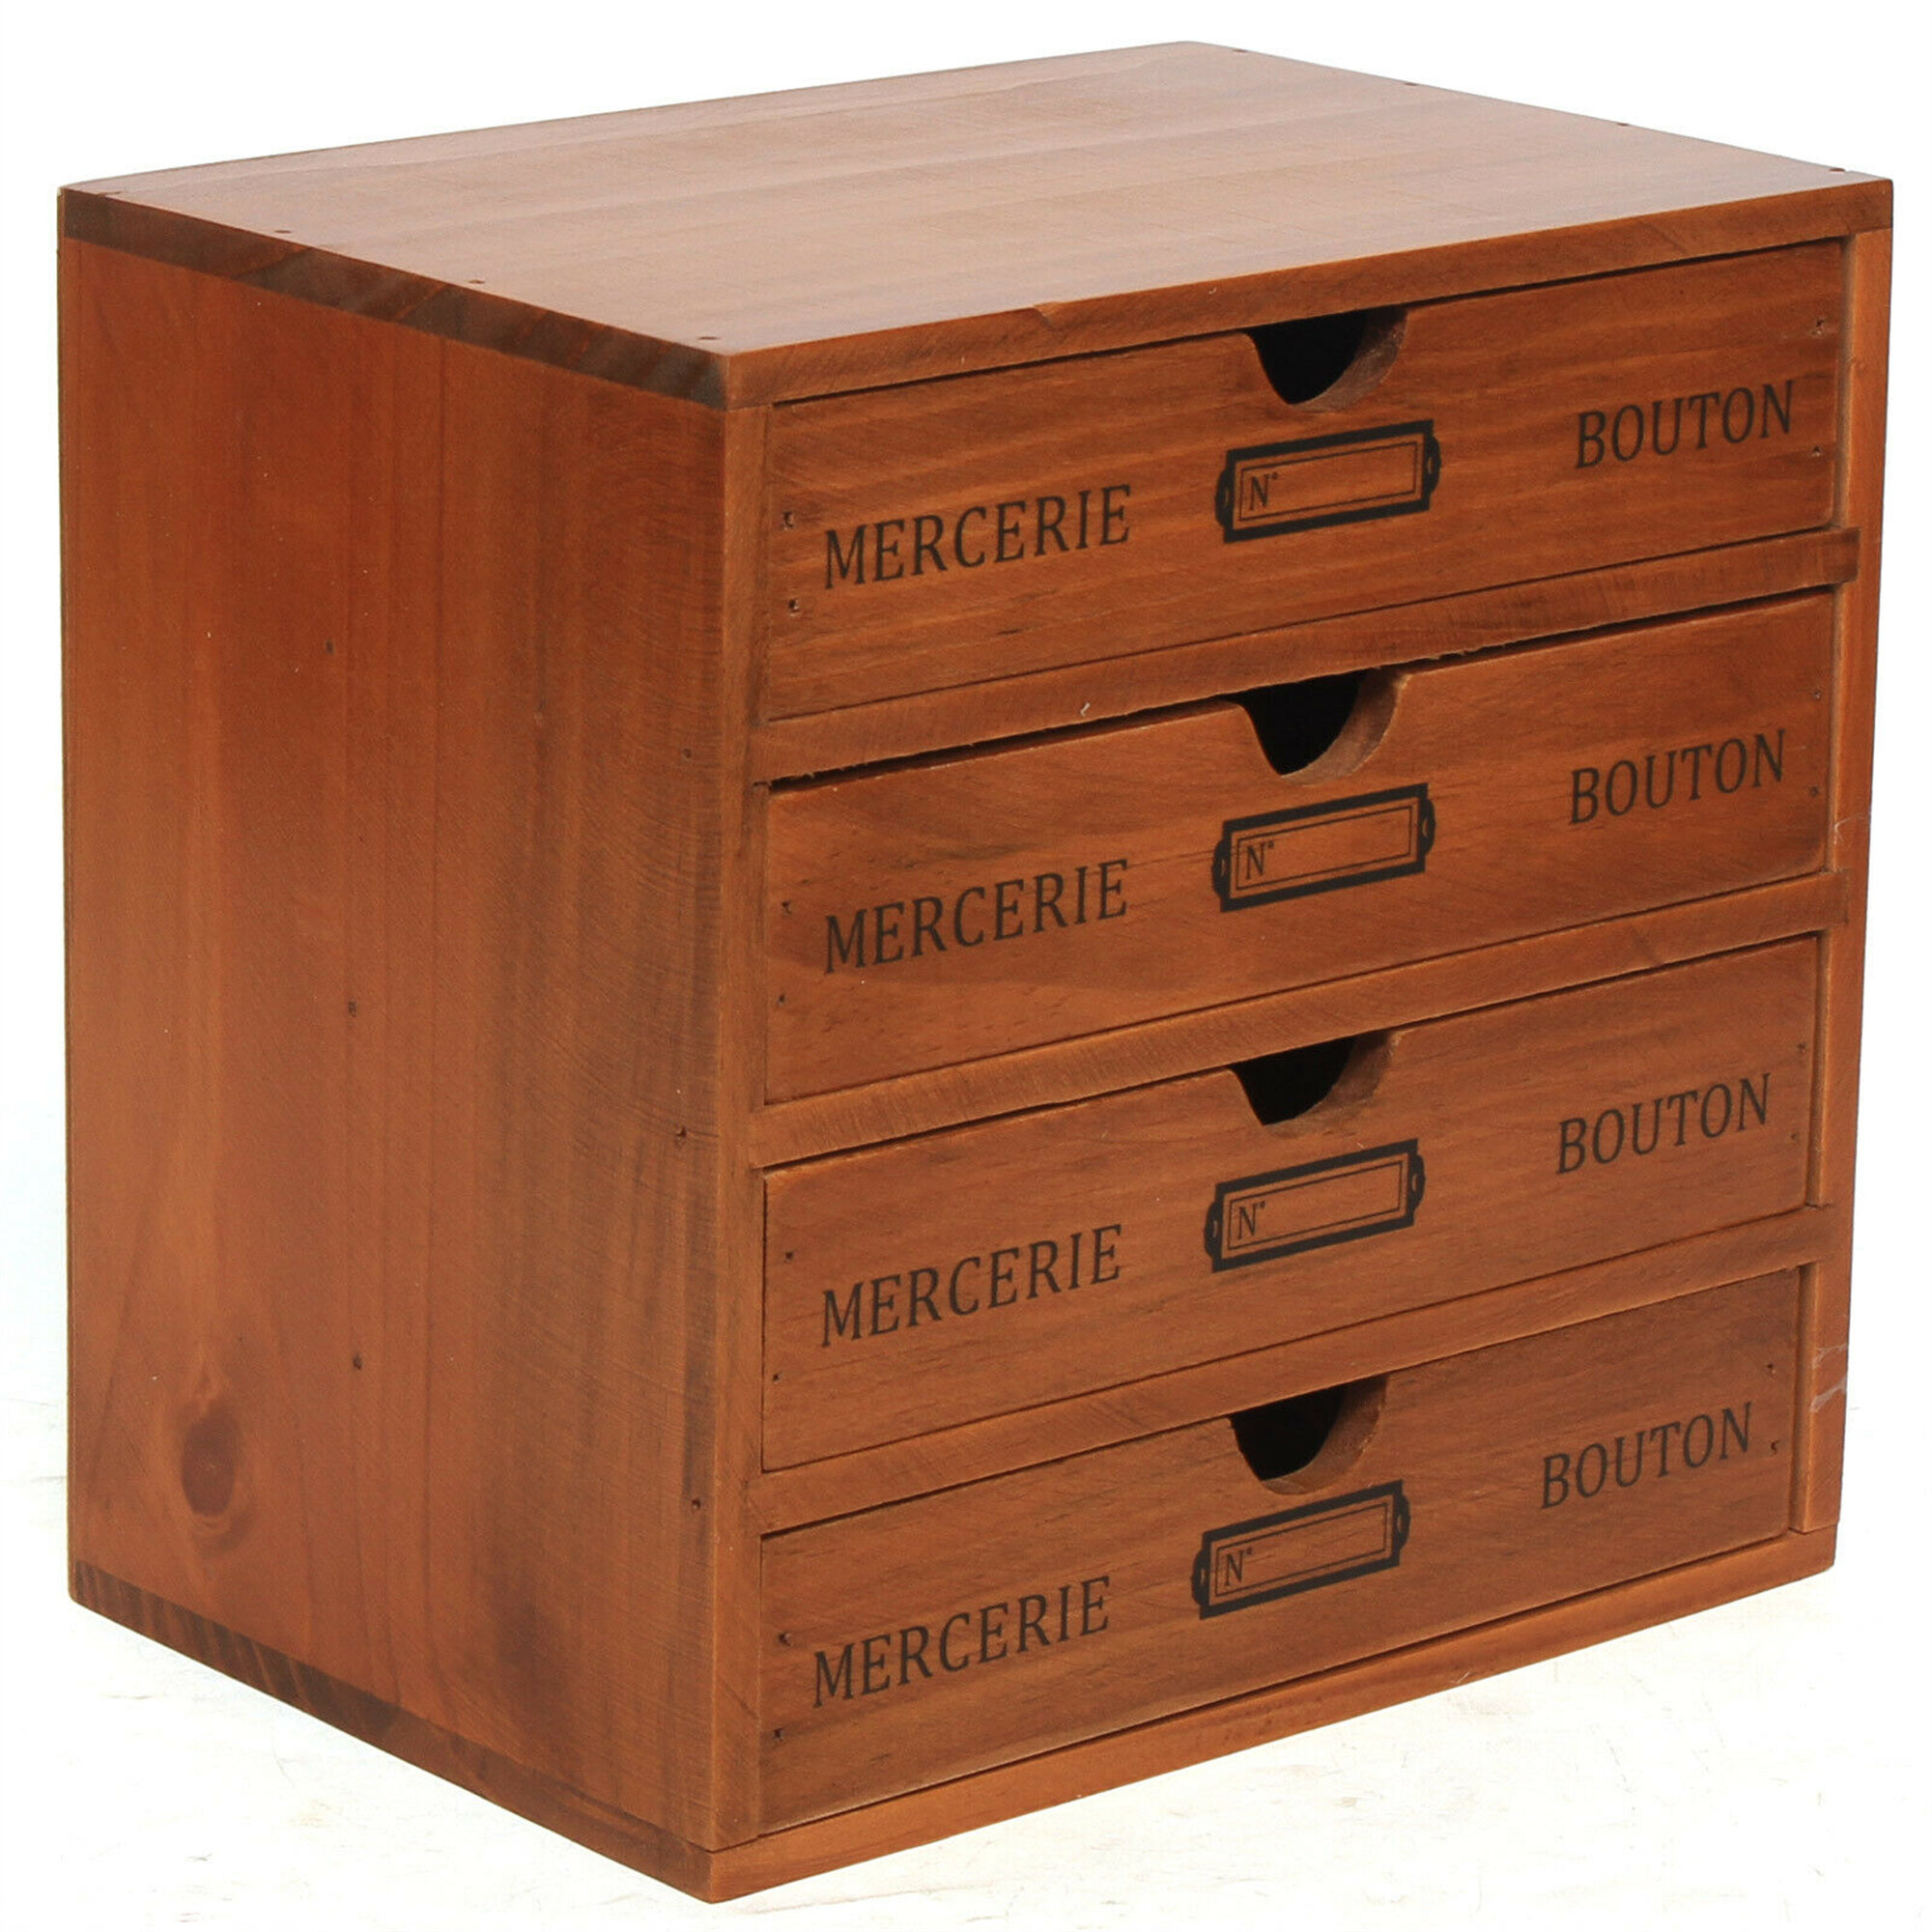 Wooden Storage Boxes, Retro Style 4 Book-shaped Sundries Organizer